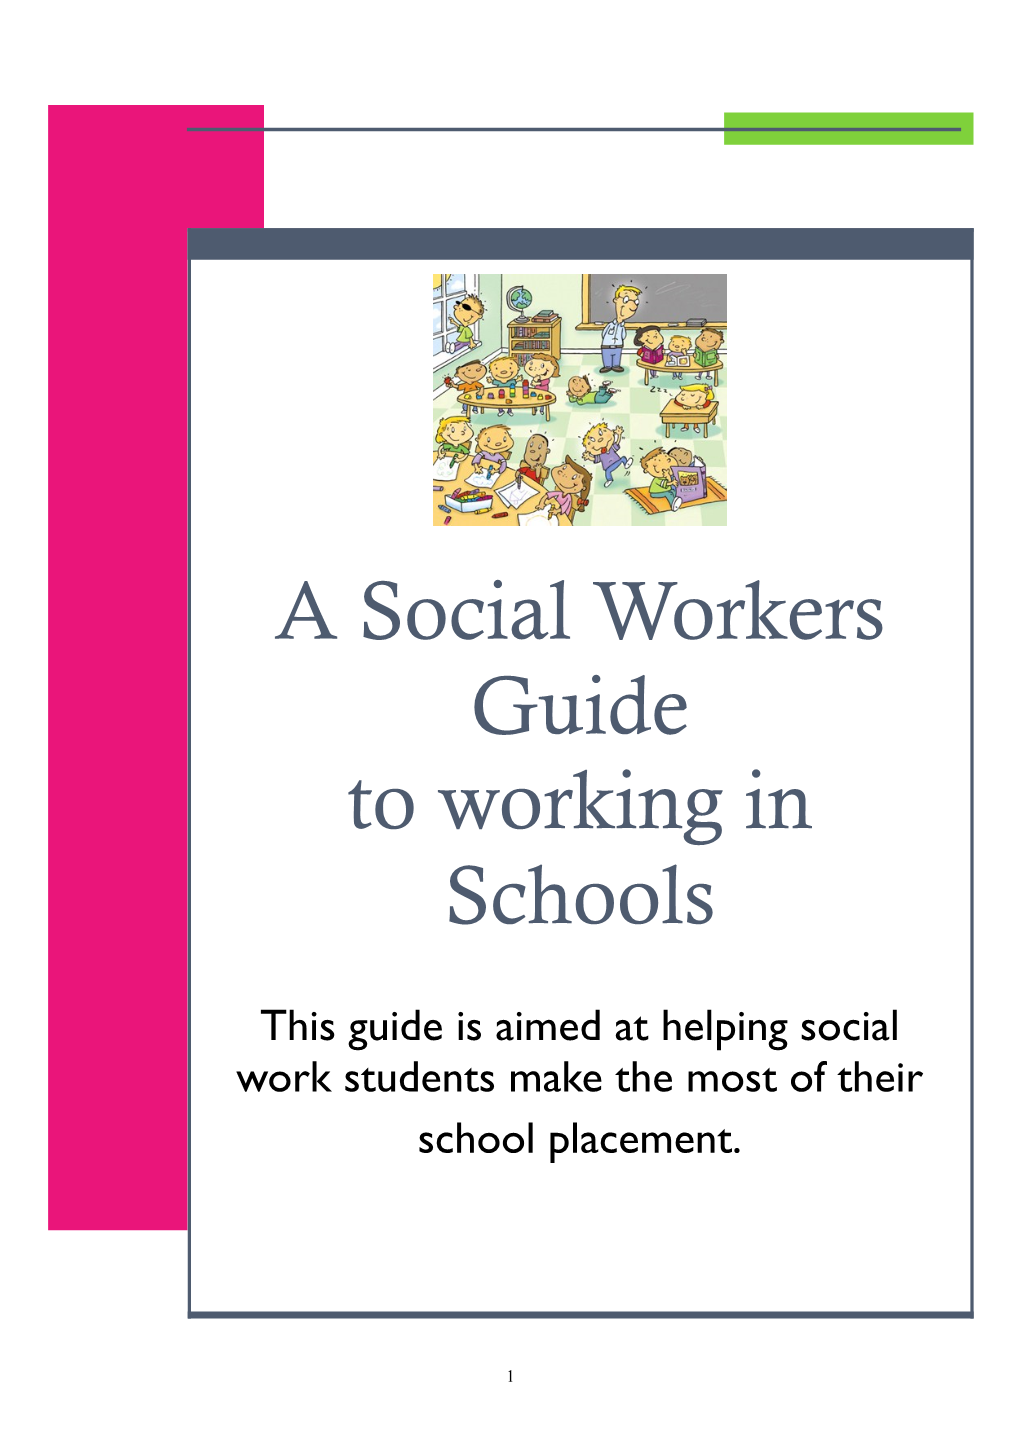 A Social Workers Guide to Working in Schools